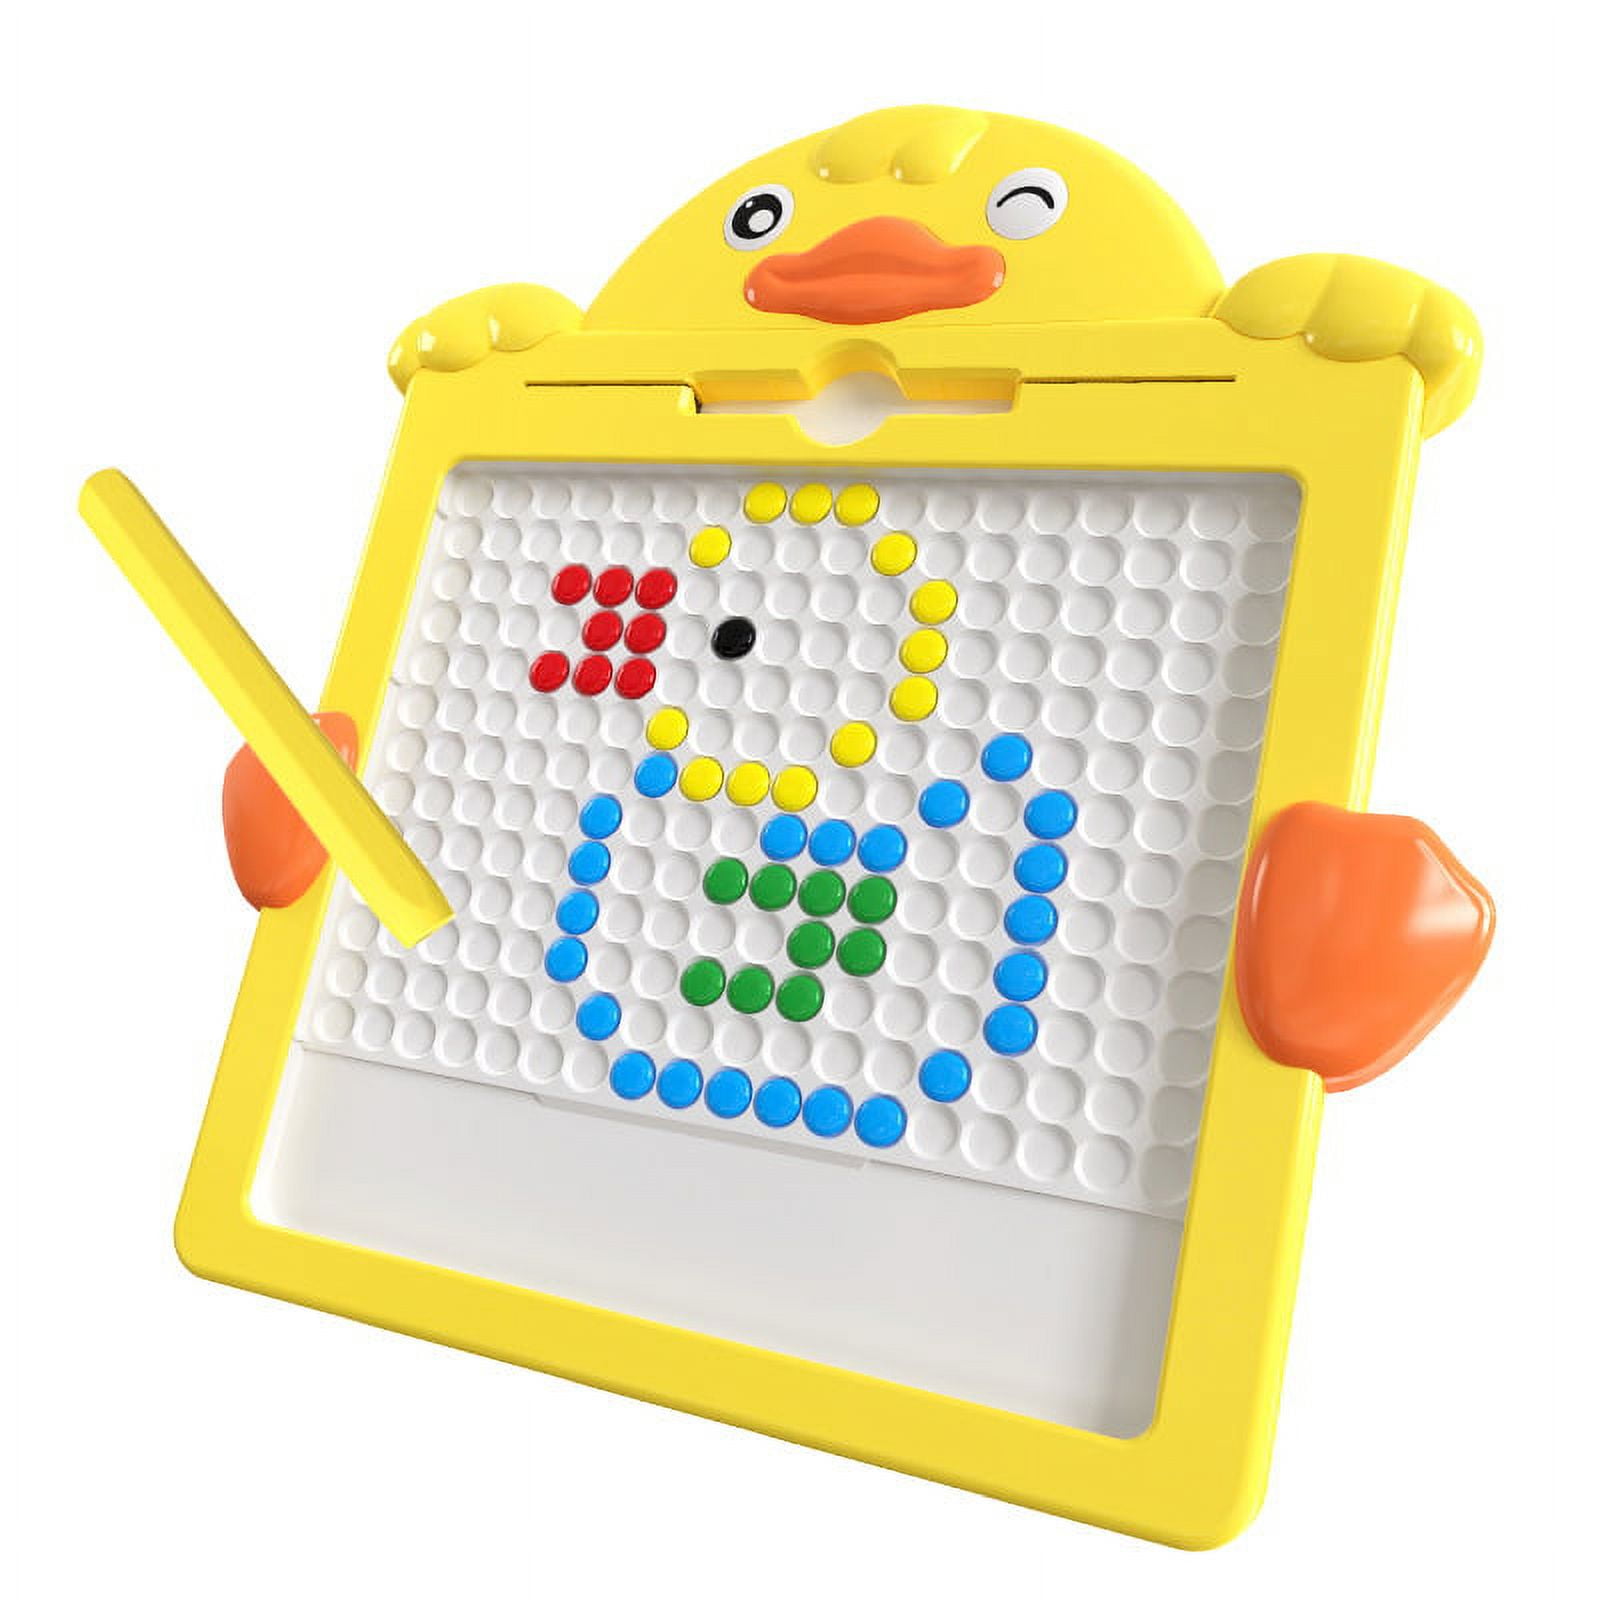 Magnetic Drawing Board for Kids and Toddlers Age 3-5, Fun Magnetic Board  with Colorful Beads and Drawing Stylus( 8 x 9 inches) 